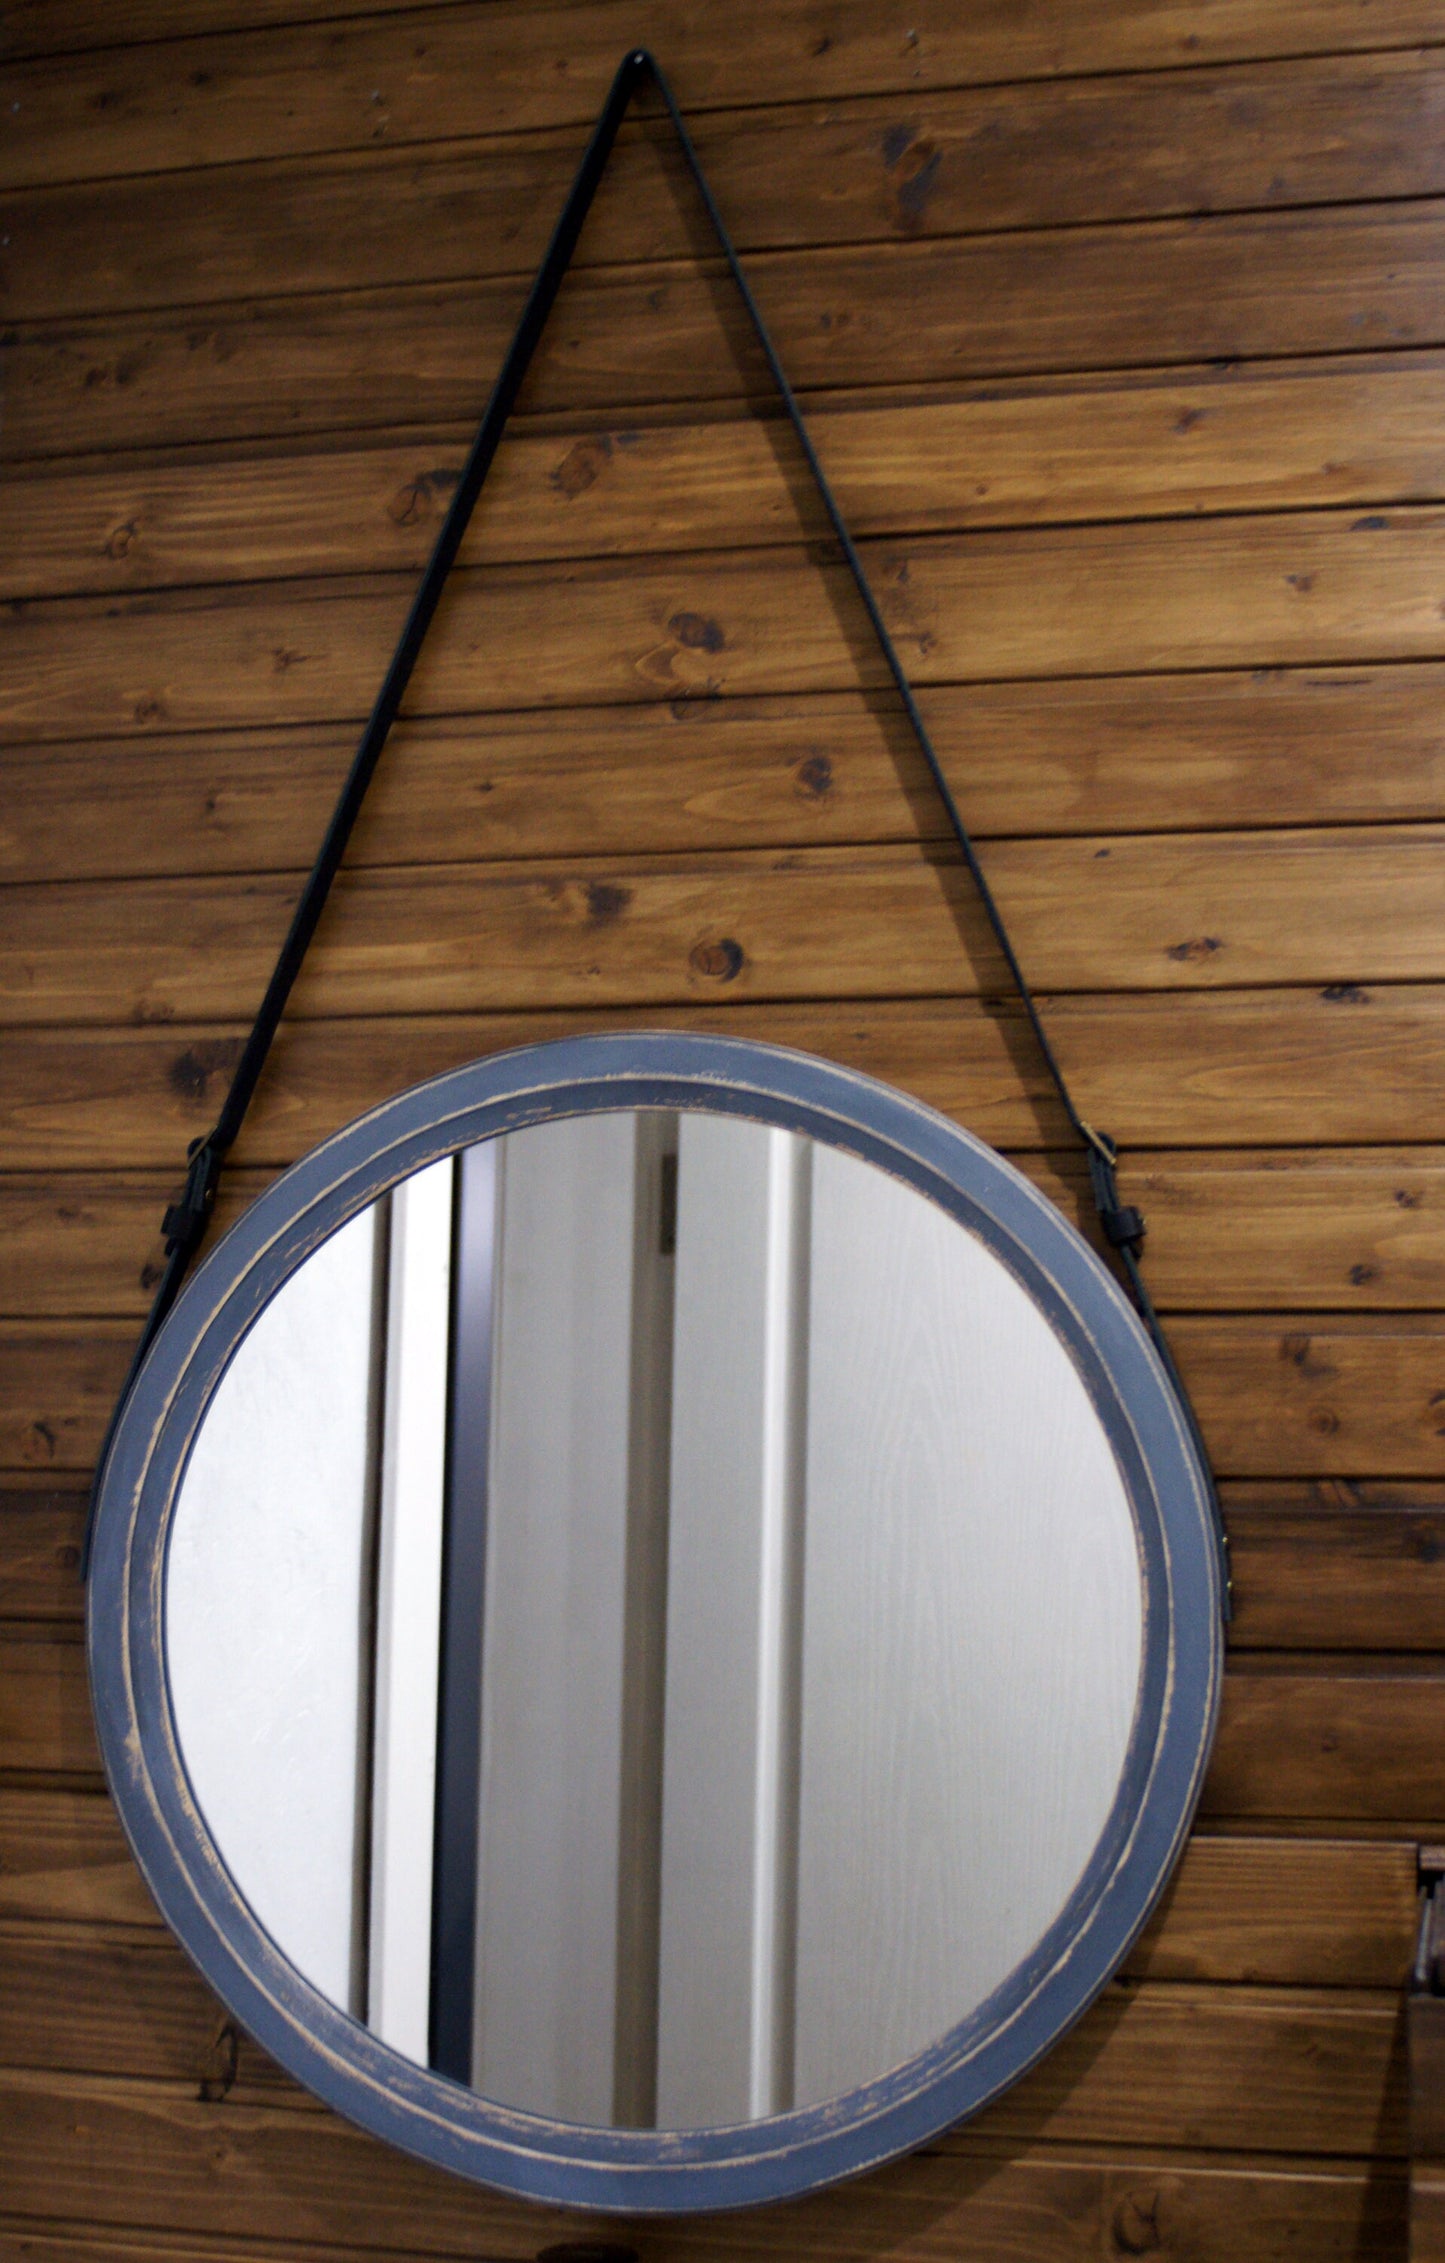 Large round mirror with leather strap, Wood distress frame leather mirror, Decorative wood framed mirror for vanity, Wood modern wall mirror